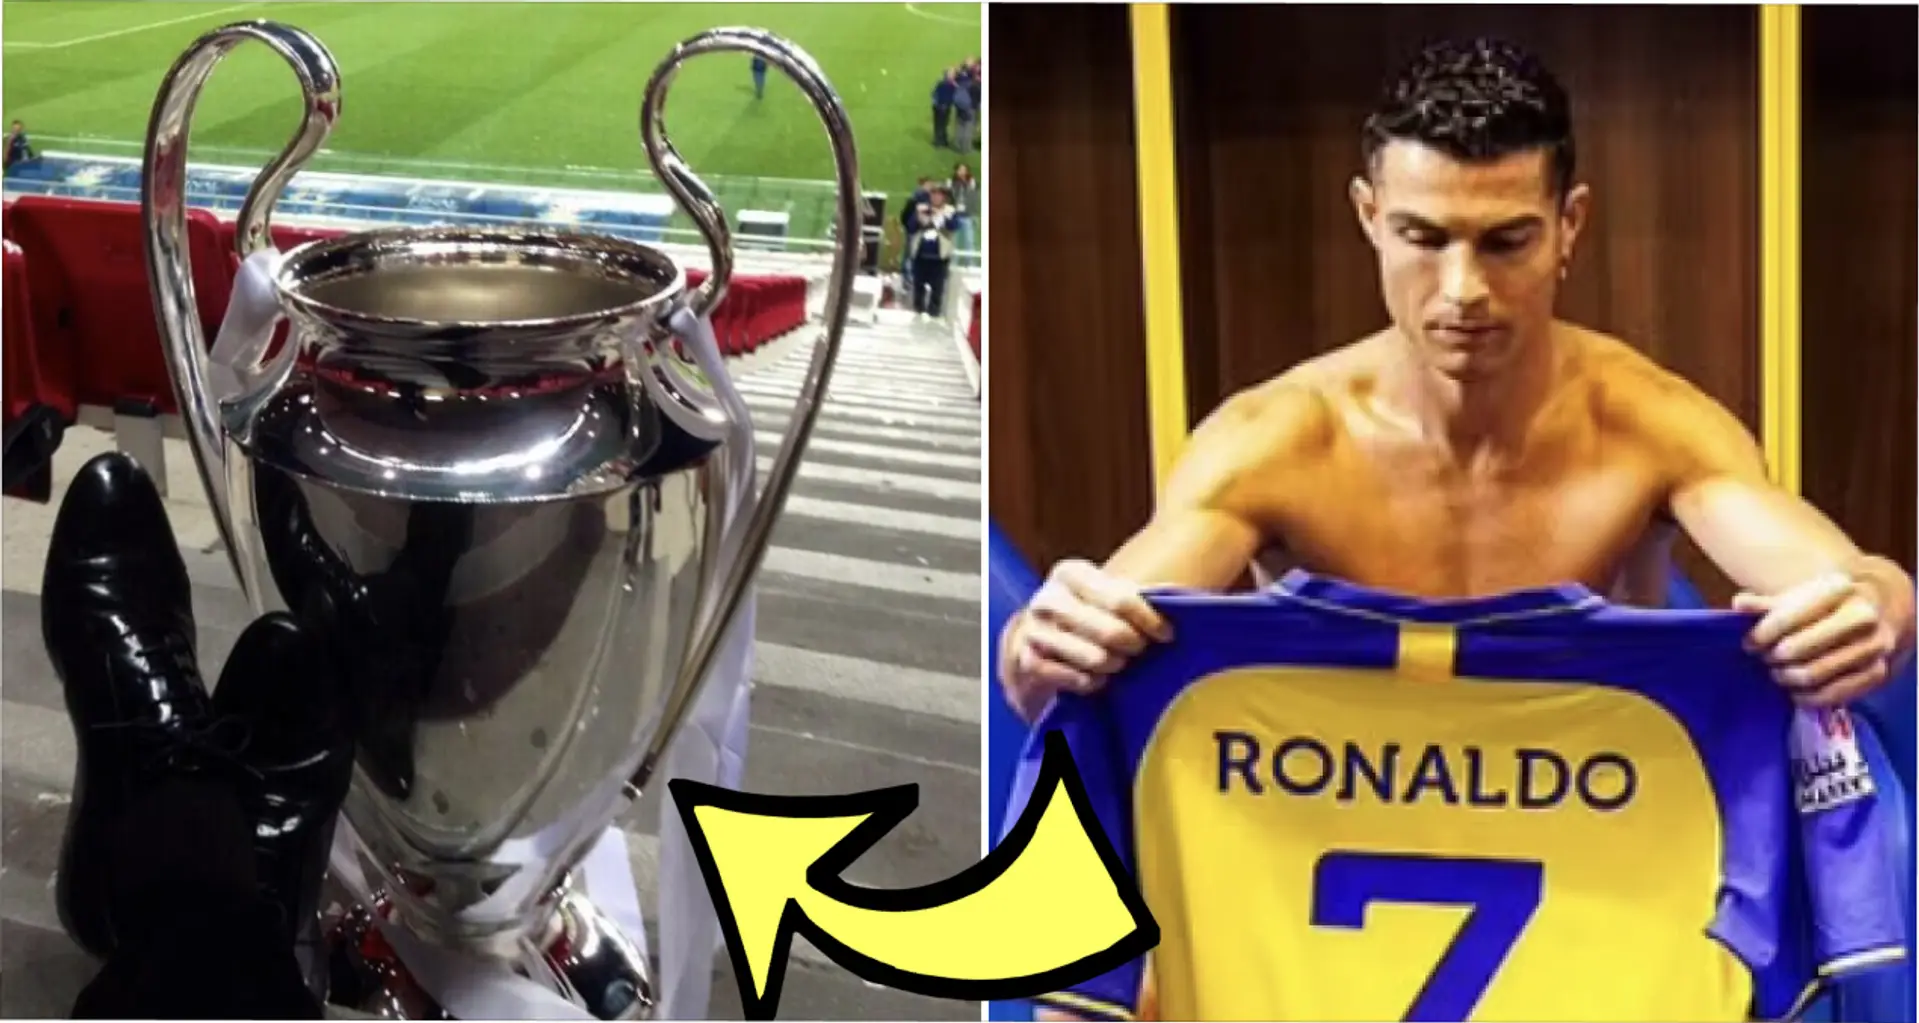 Cristiano Ronaldo linked with shock move back to European club – their coach knows him very well